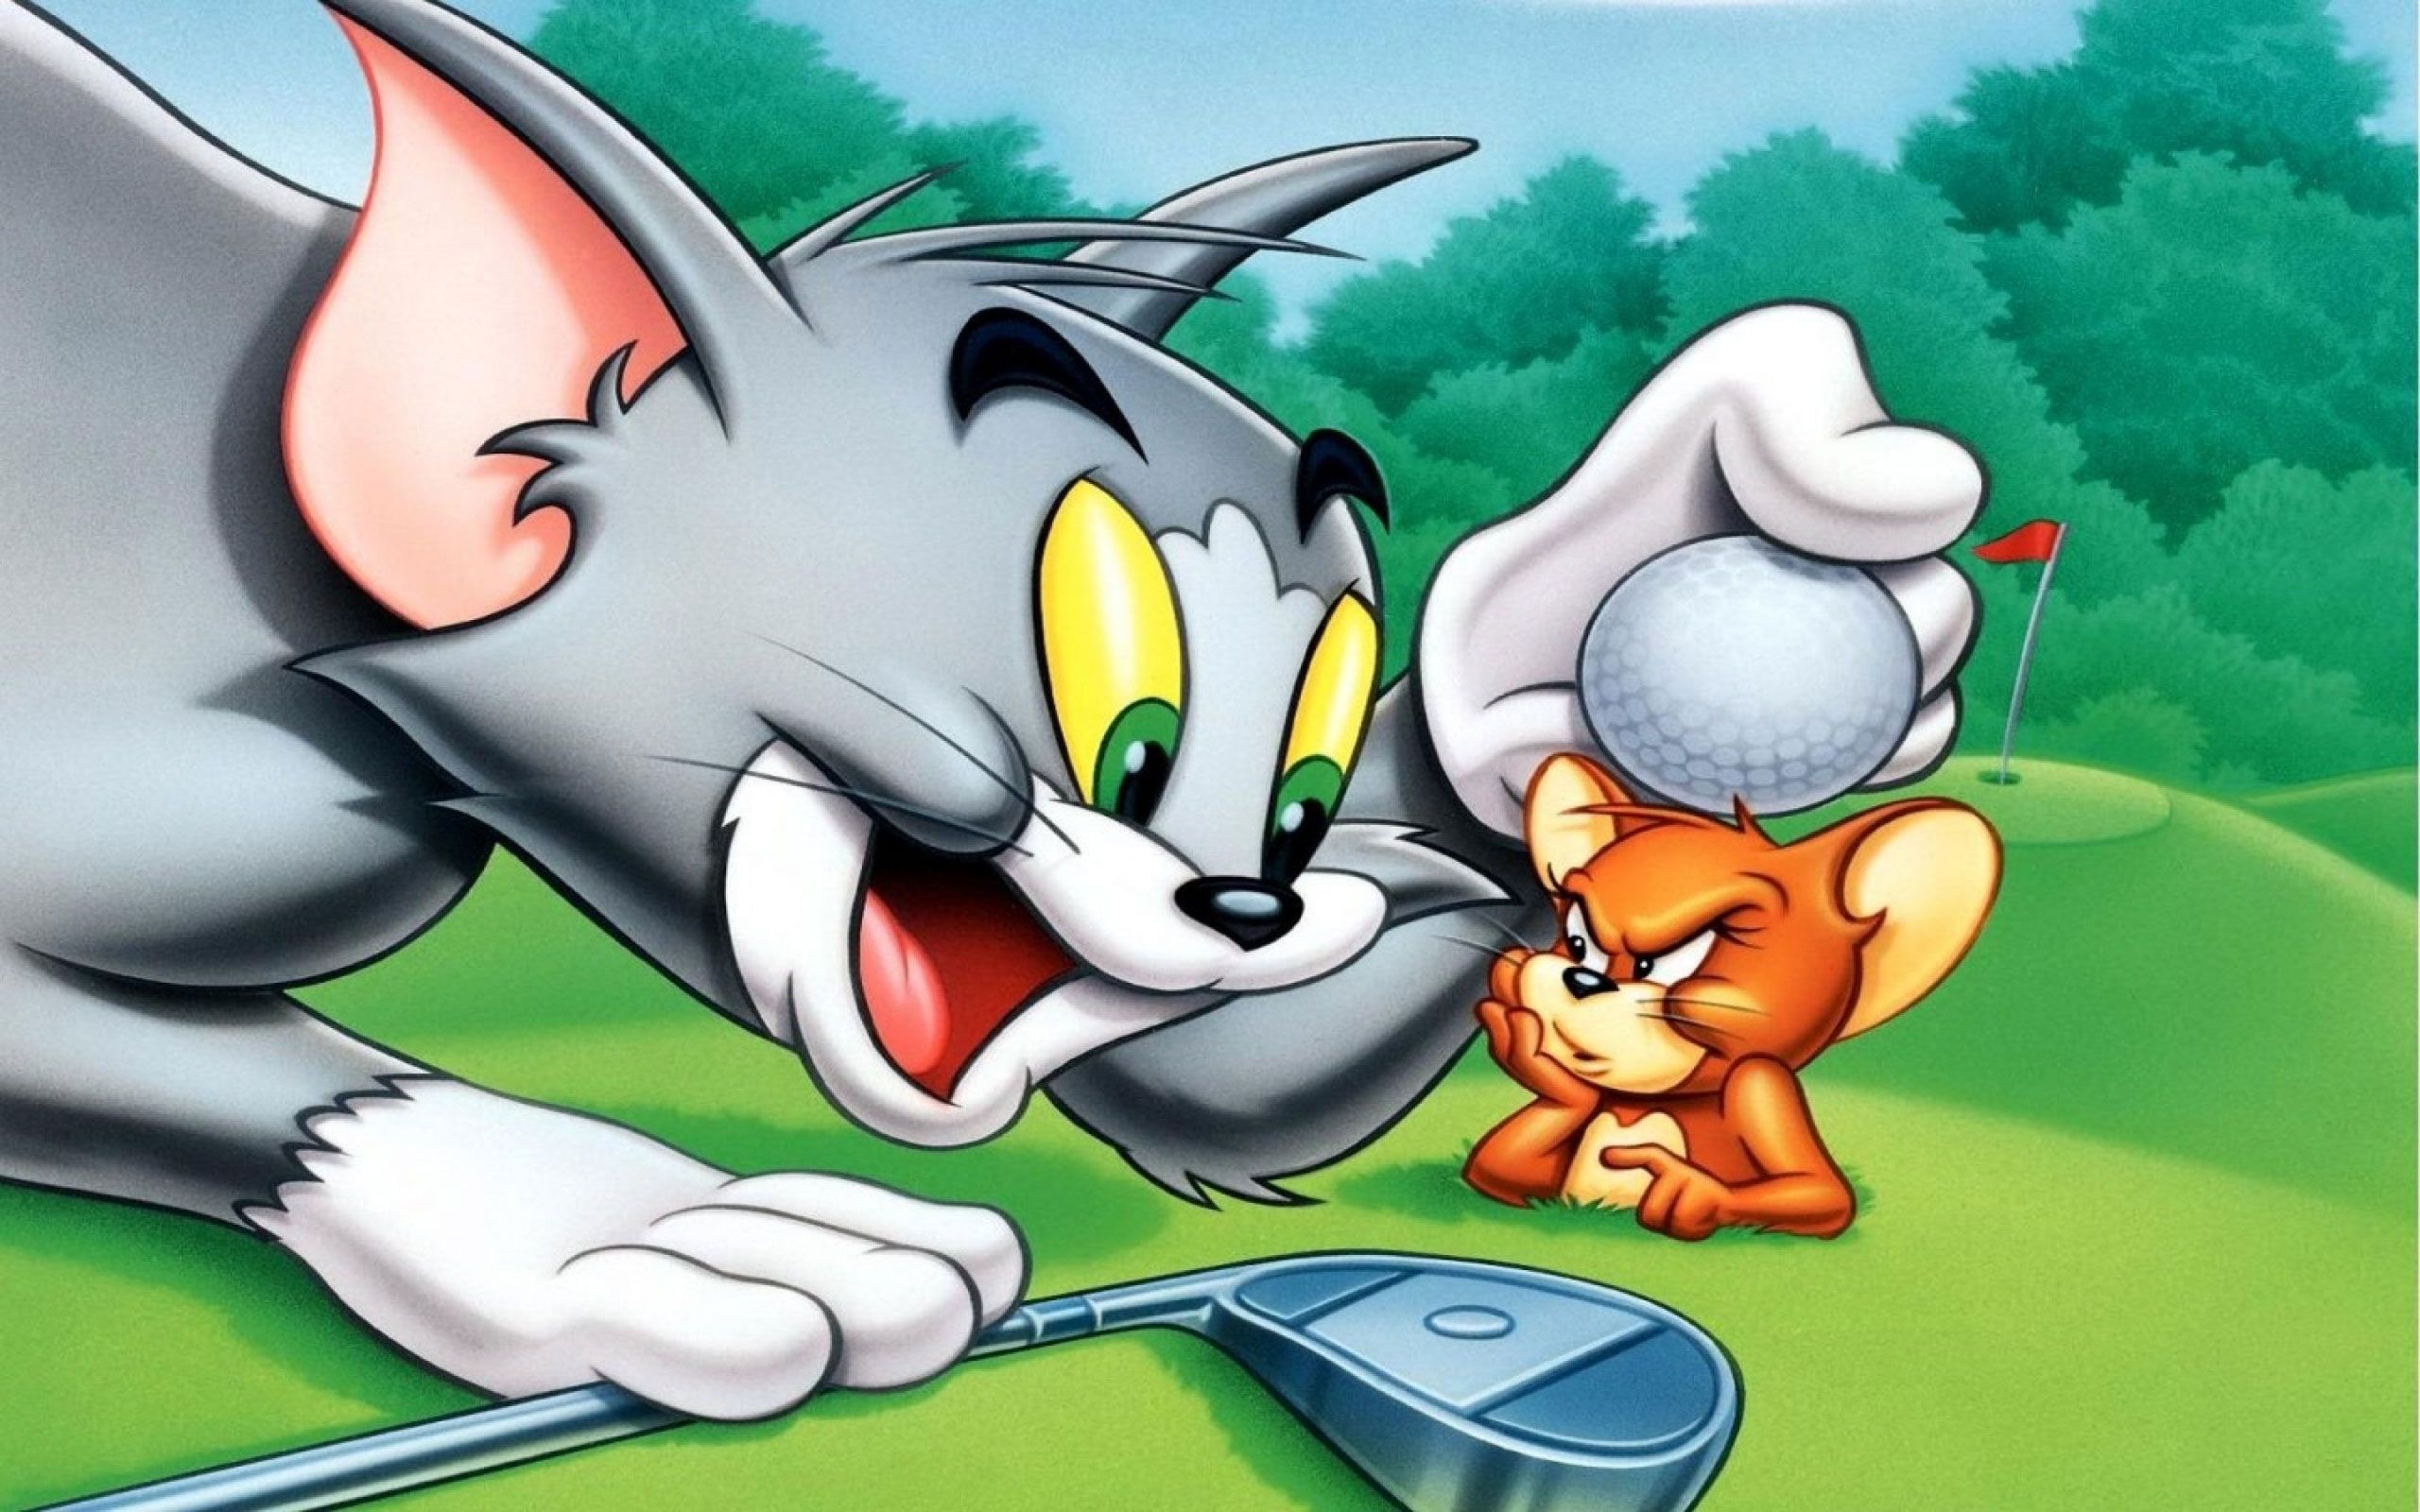 Tom and Jerry 3D Cartoon Wallpaper | HD Wallpapers